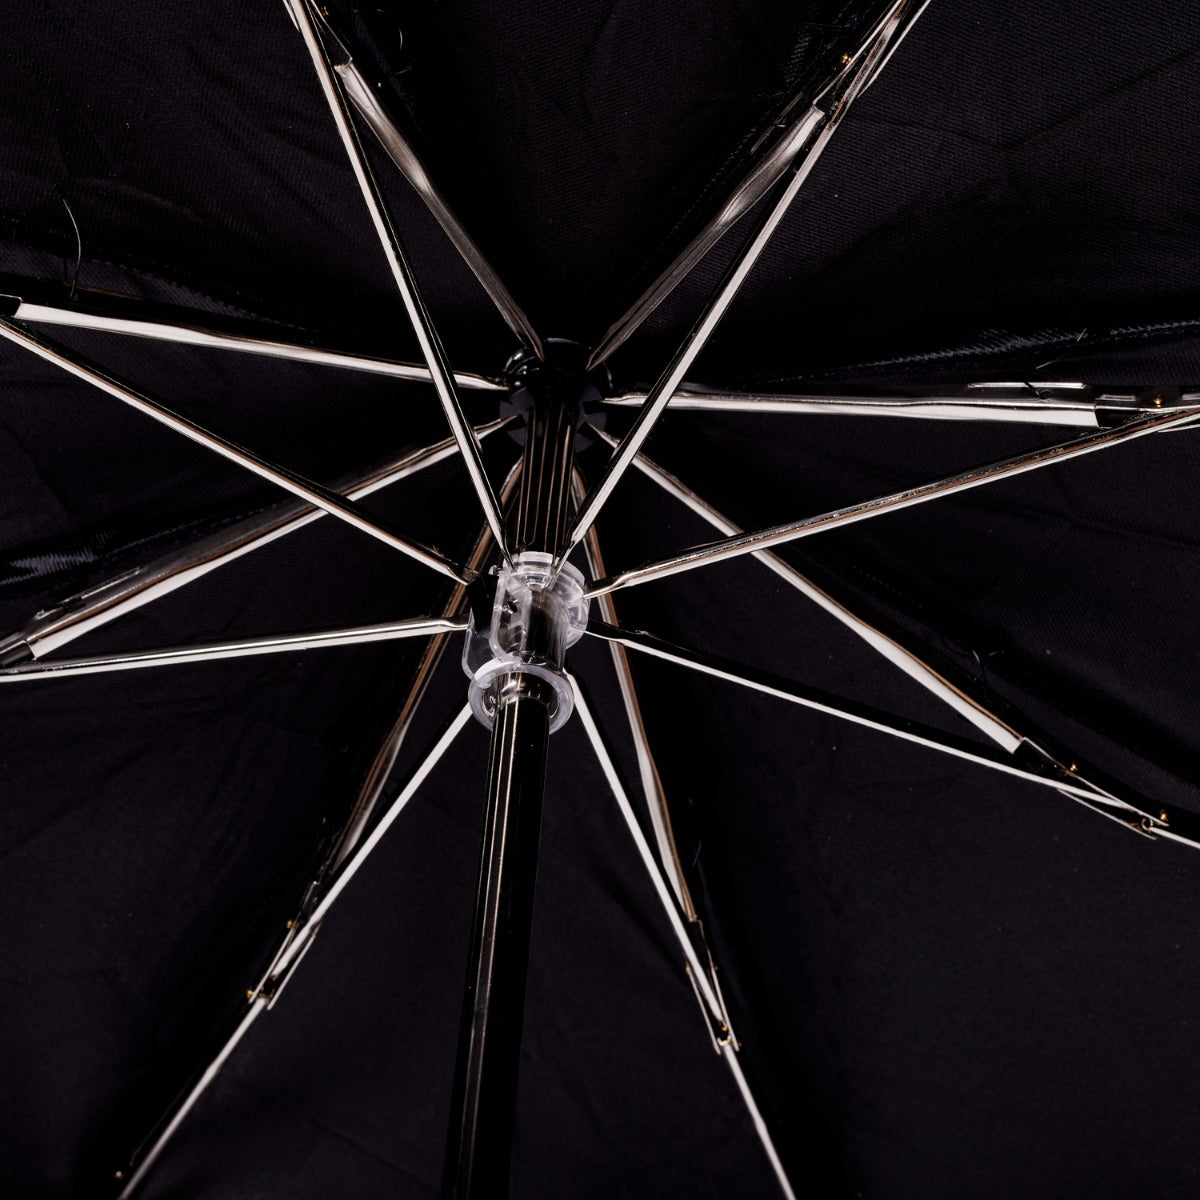 A handcrafted Black Canopy Umbrella with Malacca Handle made in Italy from KirbyAllison.com.